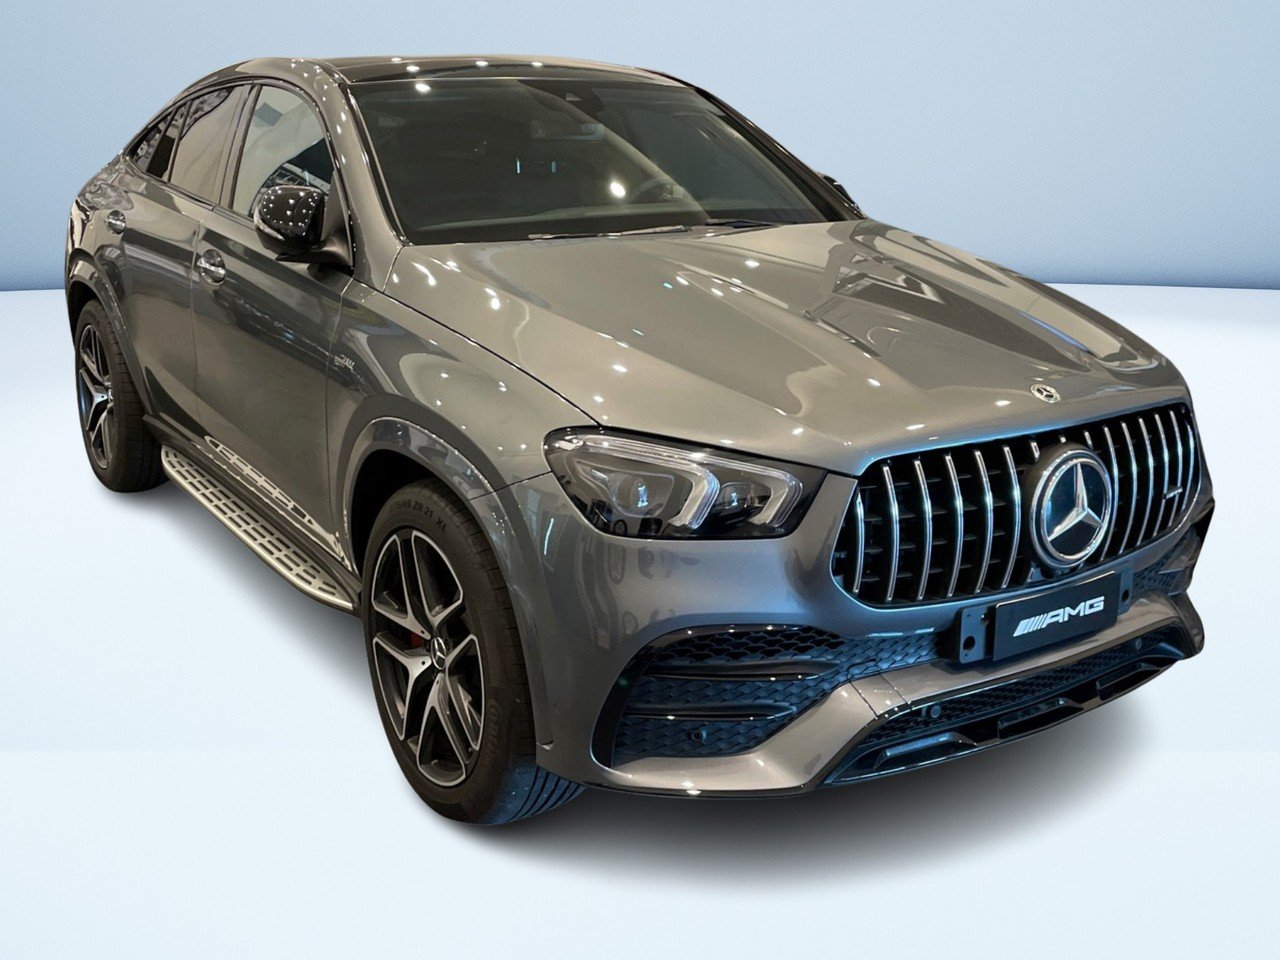 GLE Coupe 53 mhev (eq-boost) AMG Premium Plus 4mat - Certified